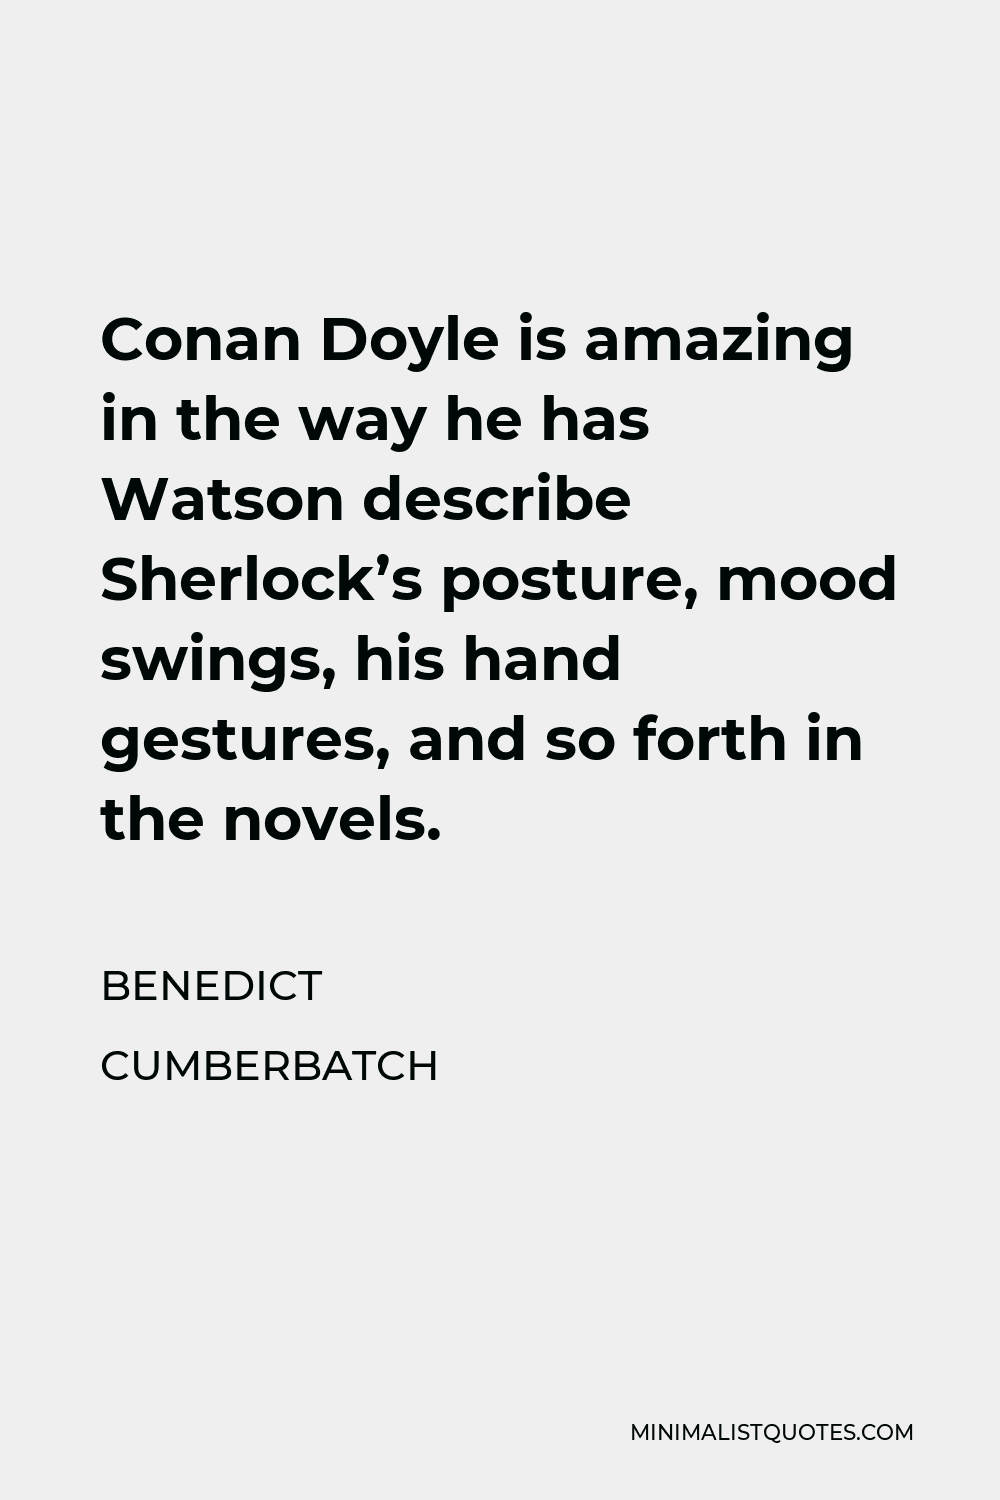 Benedict Cumberbatch Quote - Conan Doyle is amazing in the way he has Watson describe Sherlock’s posture, mood swings, his hand gestures, and so forth in the novels.